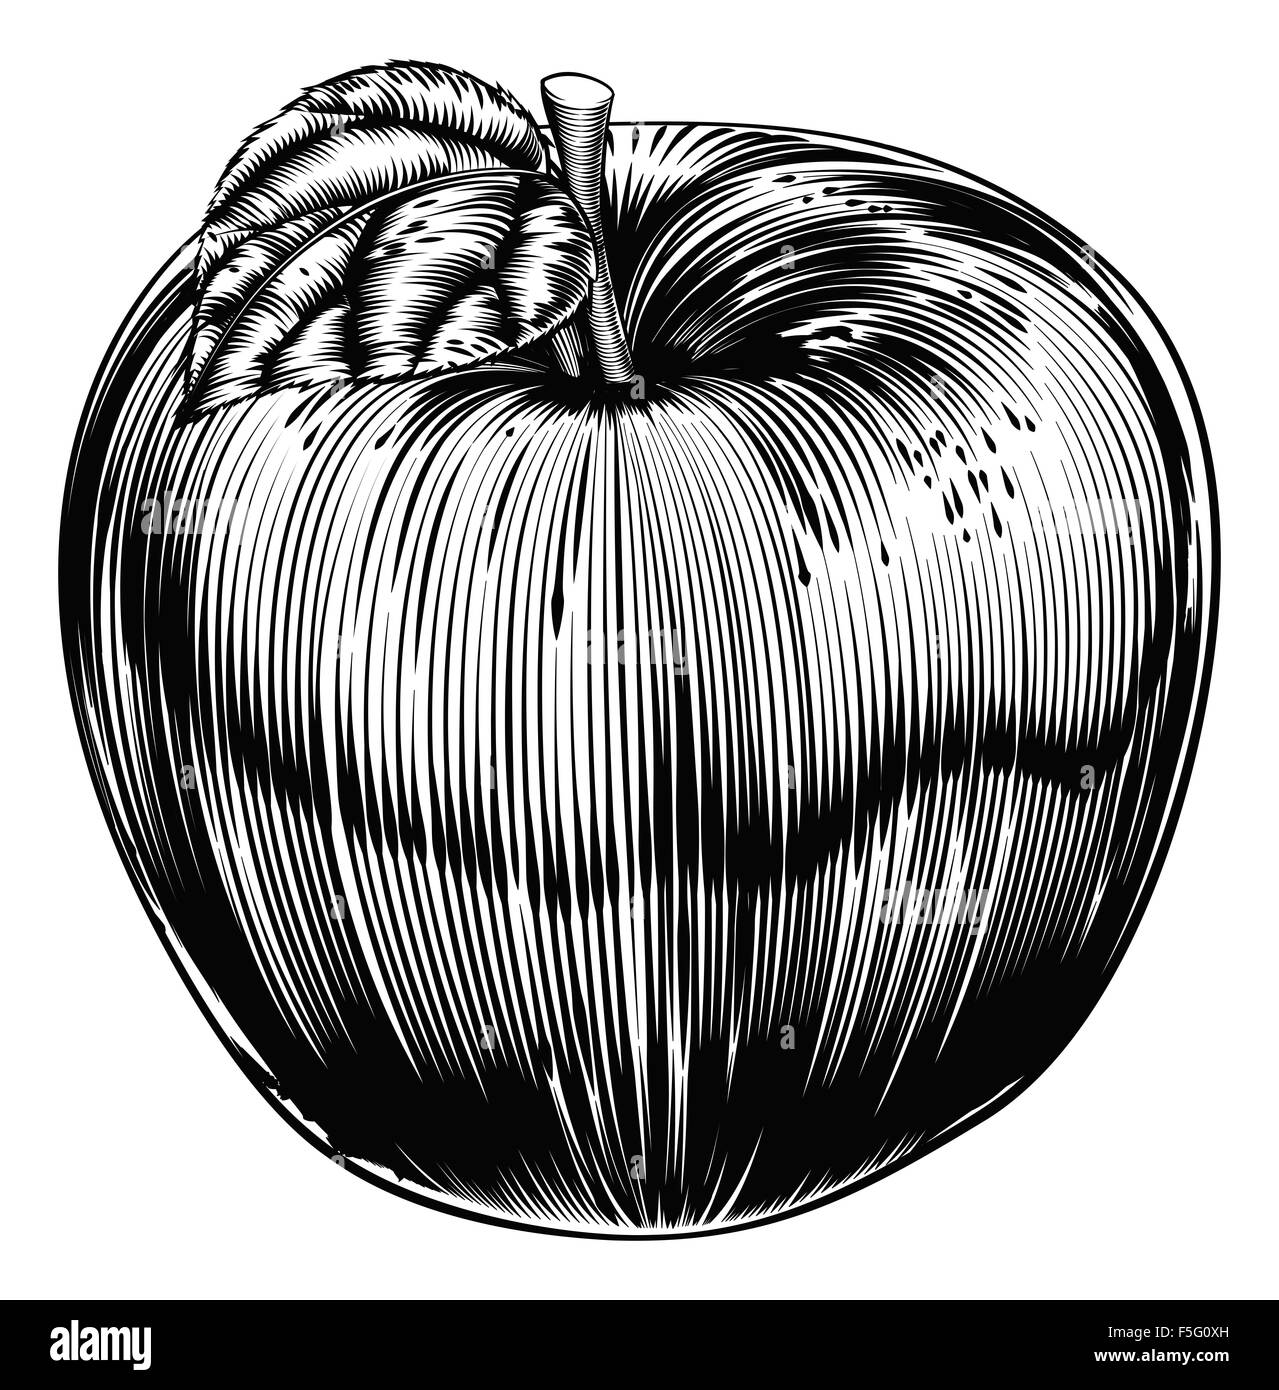 An original illustration of a apple fruit in a vintage woodcut or woodblock style Stock Photo